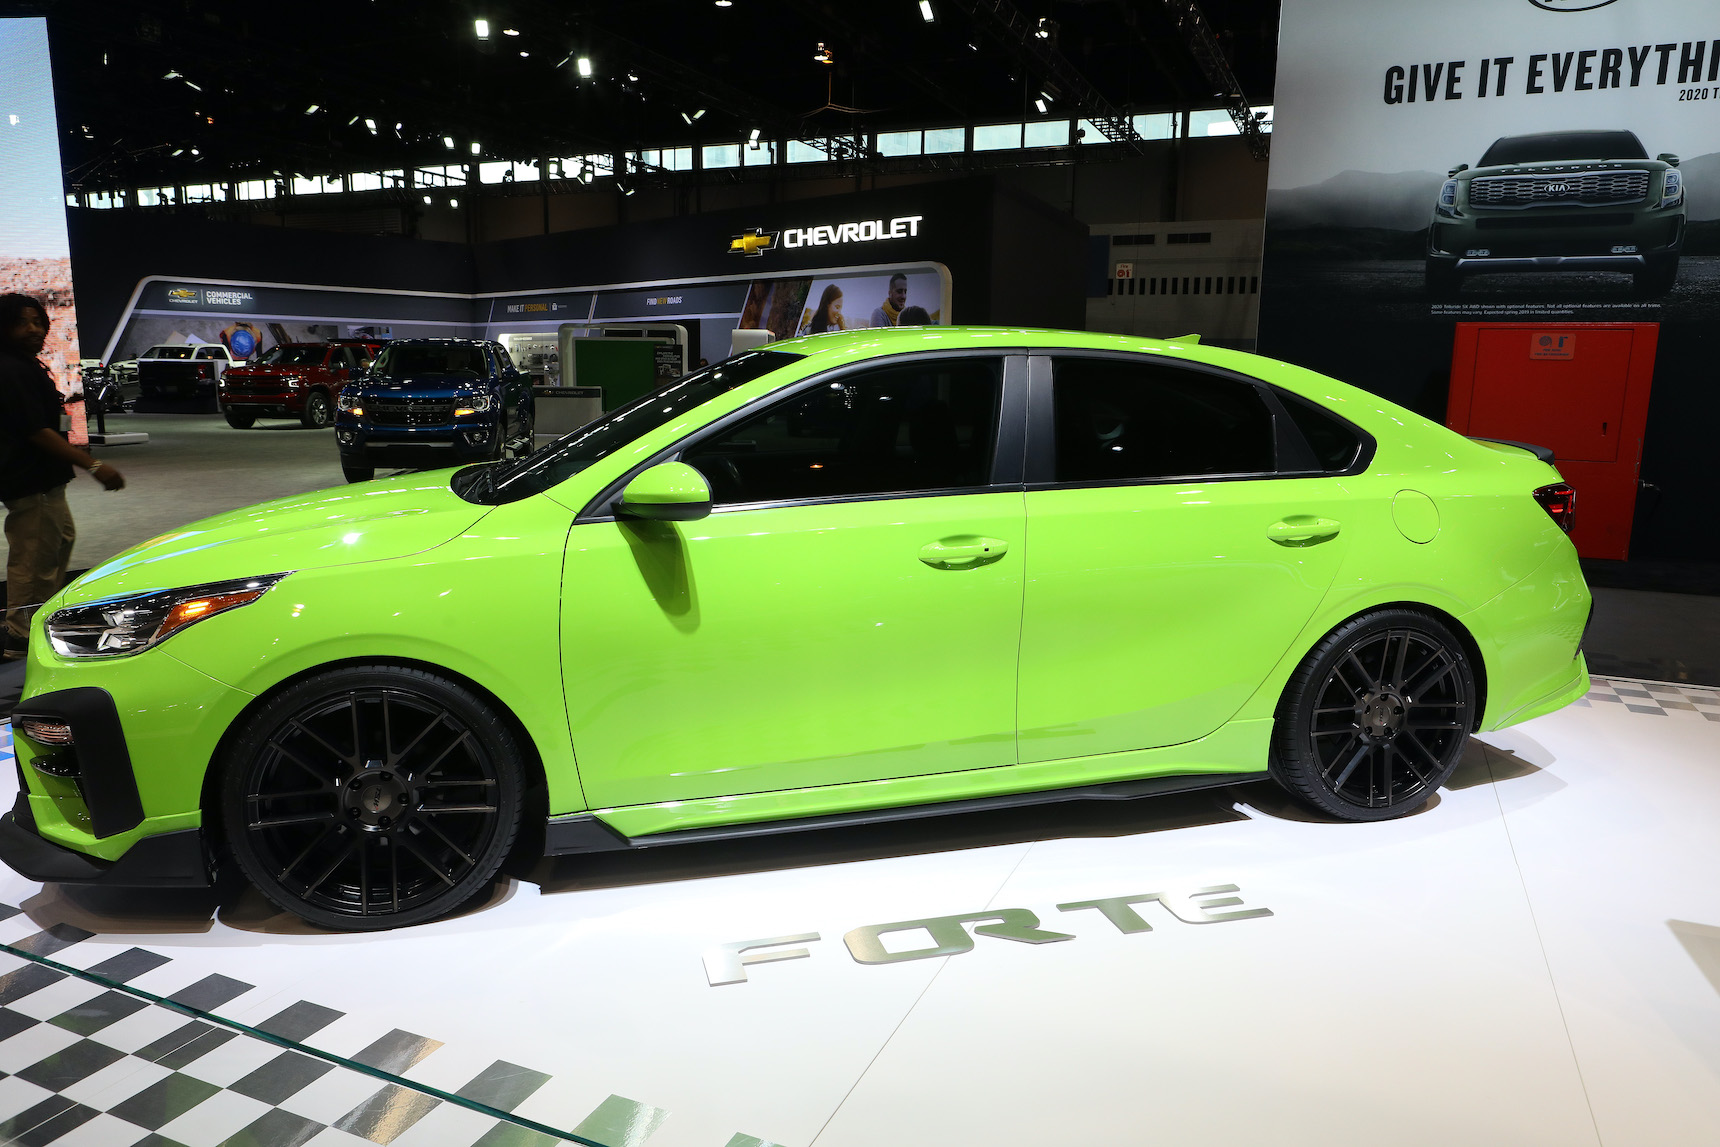 2019 Kia Forte is on display at the 111th Annual Chicago Auto Show